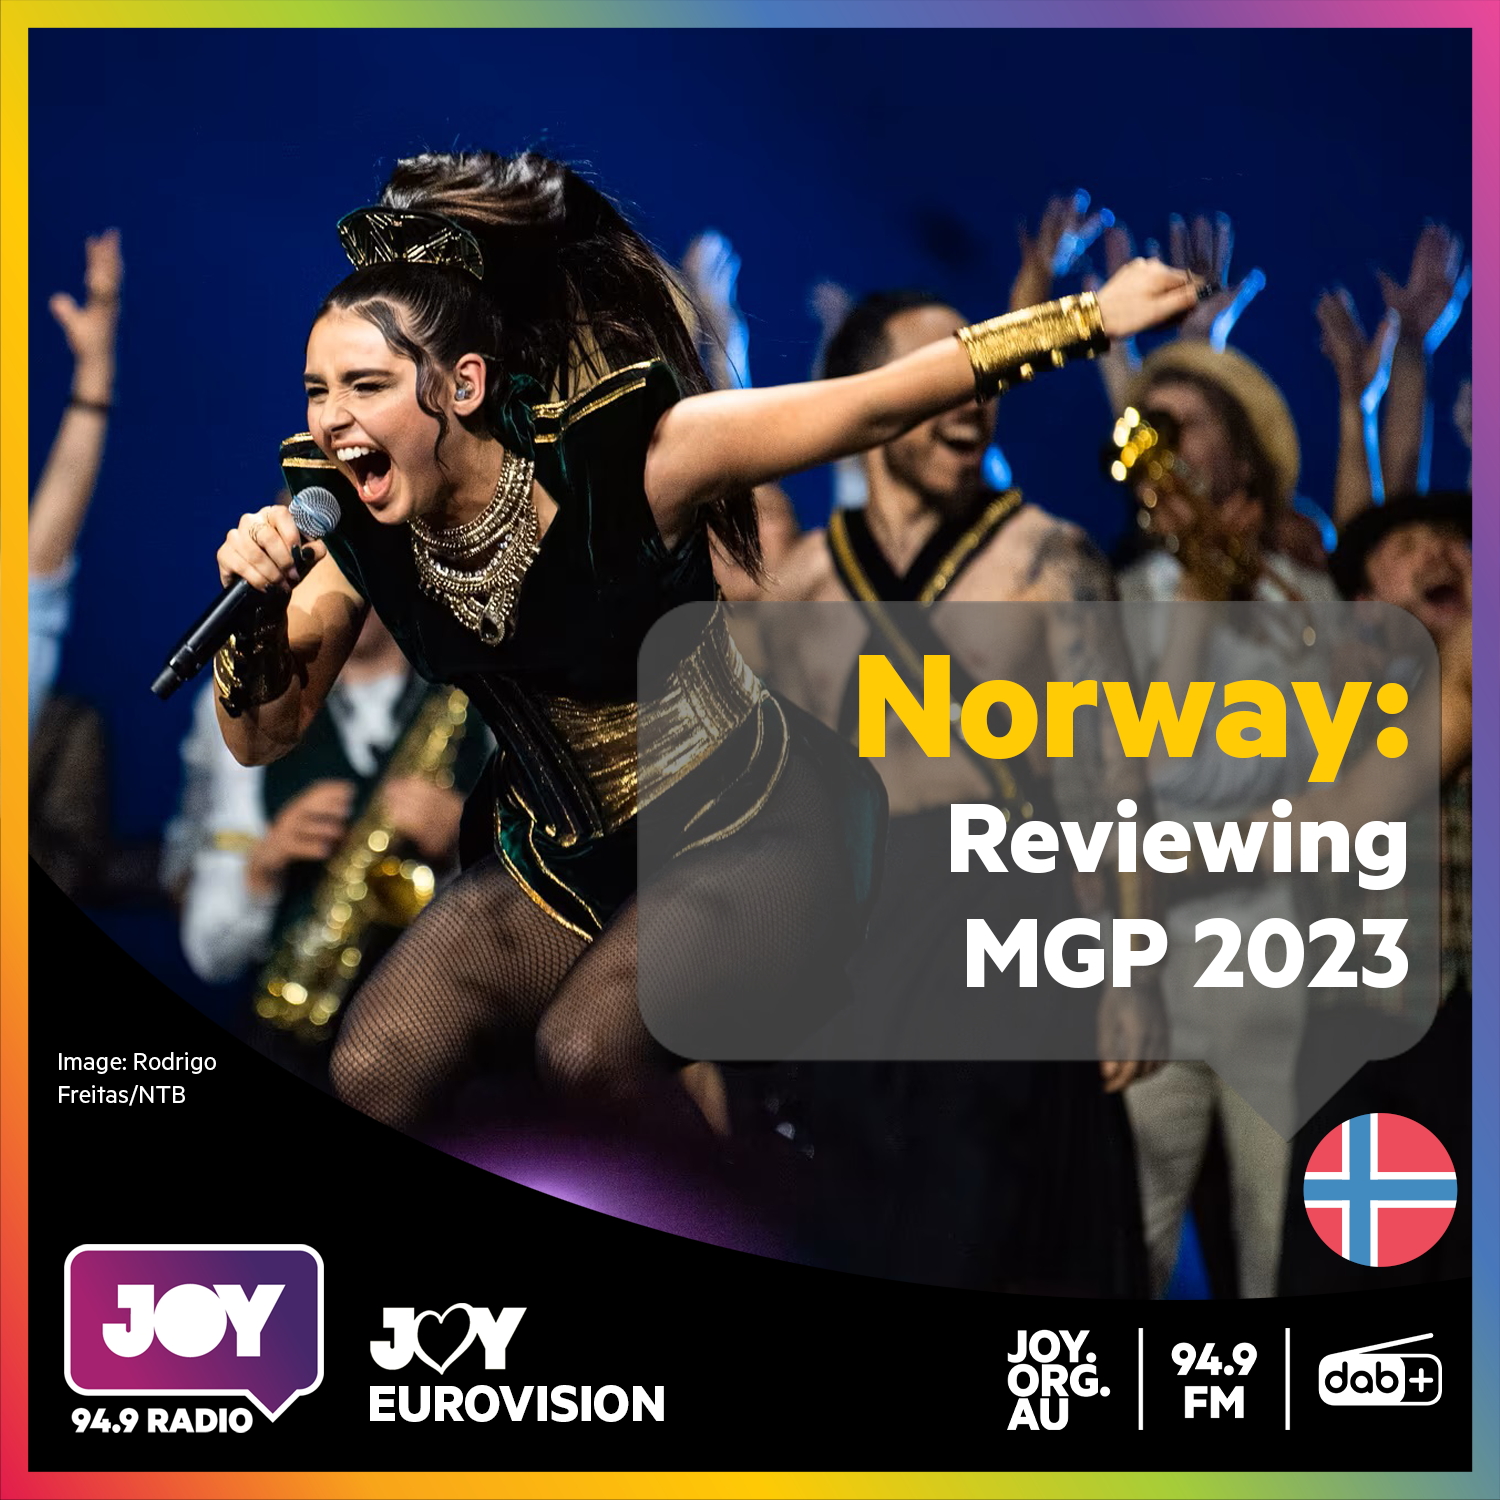 🇳🇴 Reviewing Melodi Grand Prix 2023: The Royal Court comes to Norway